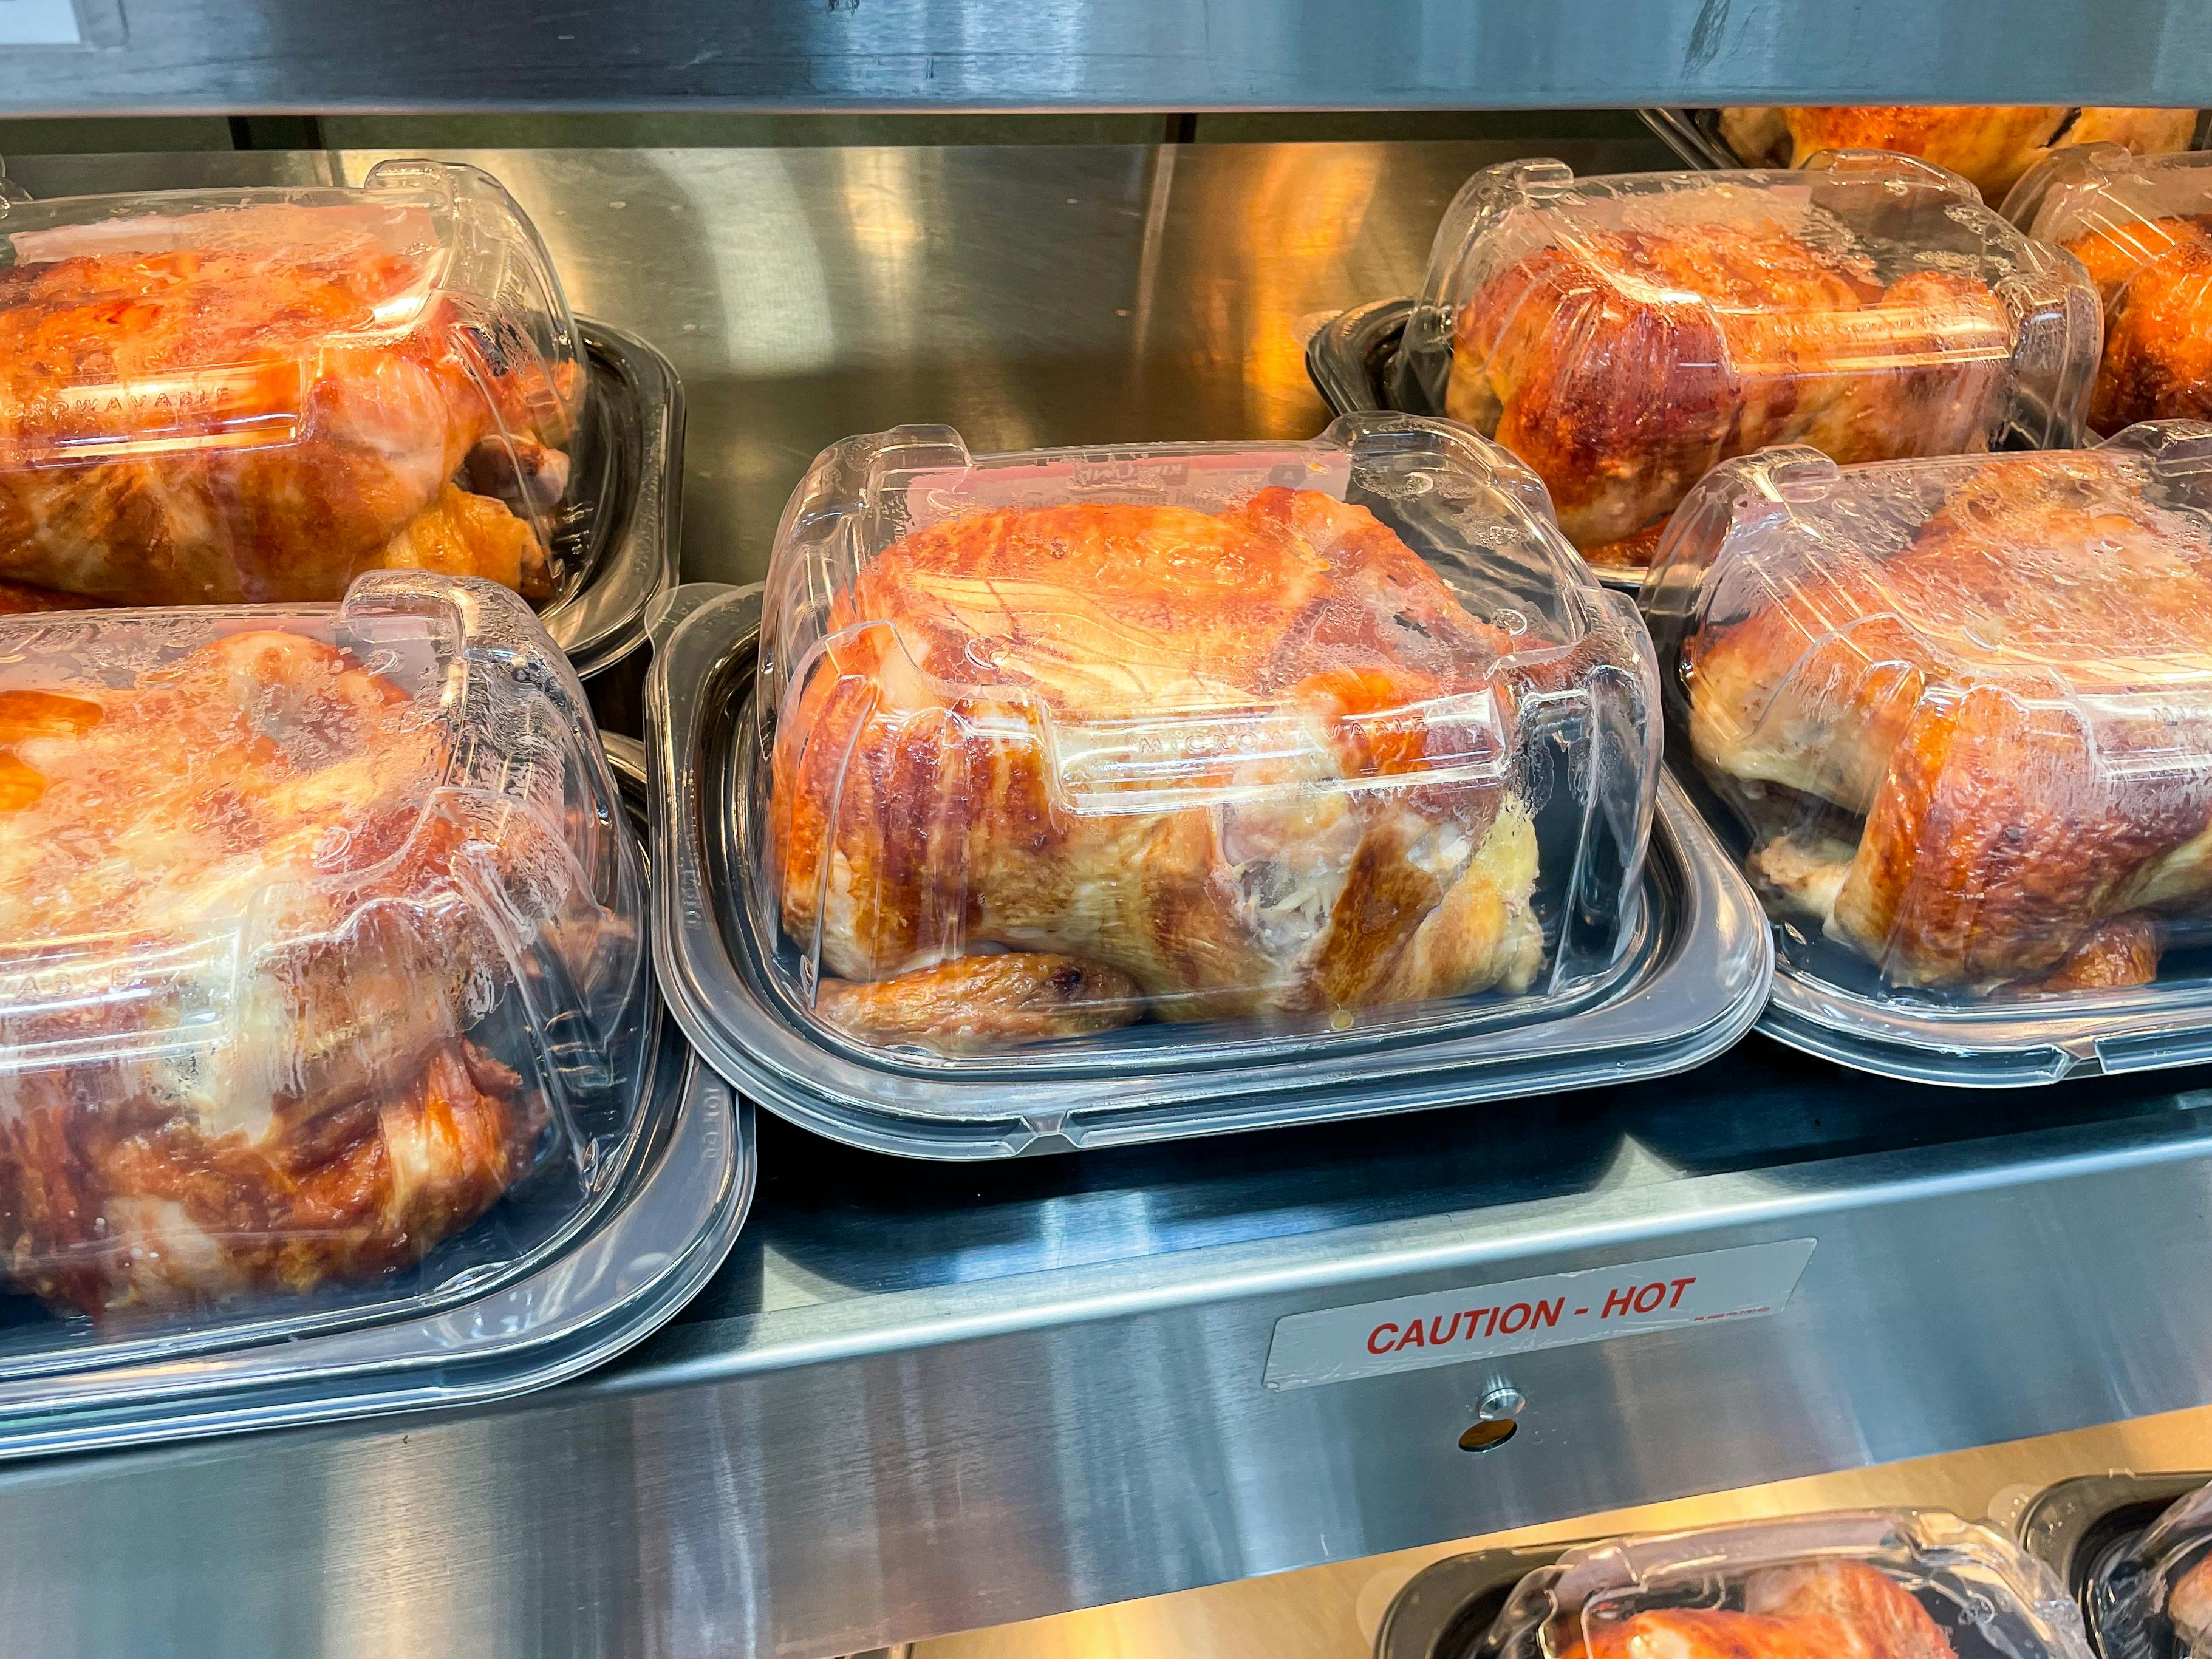 How to Pick the Juiciest Rotisserie Chicken at the Grocery Store